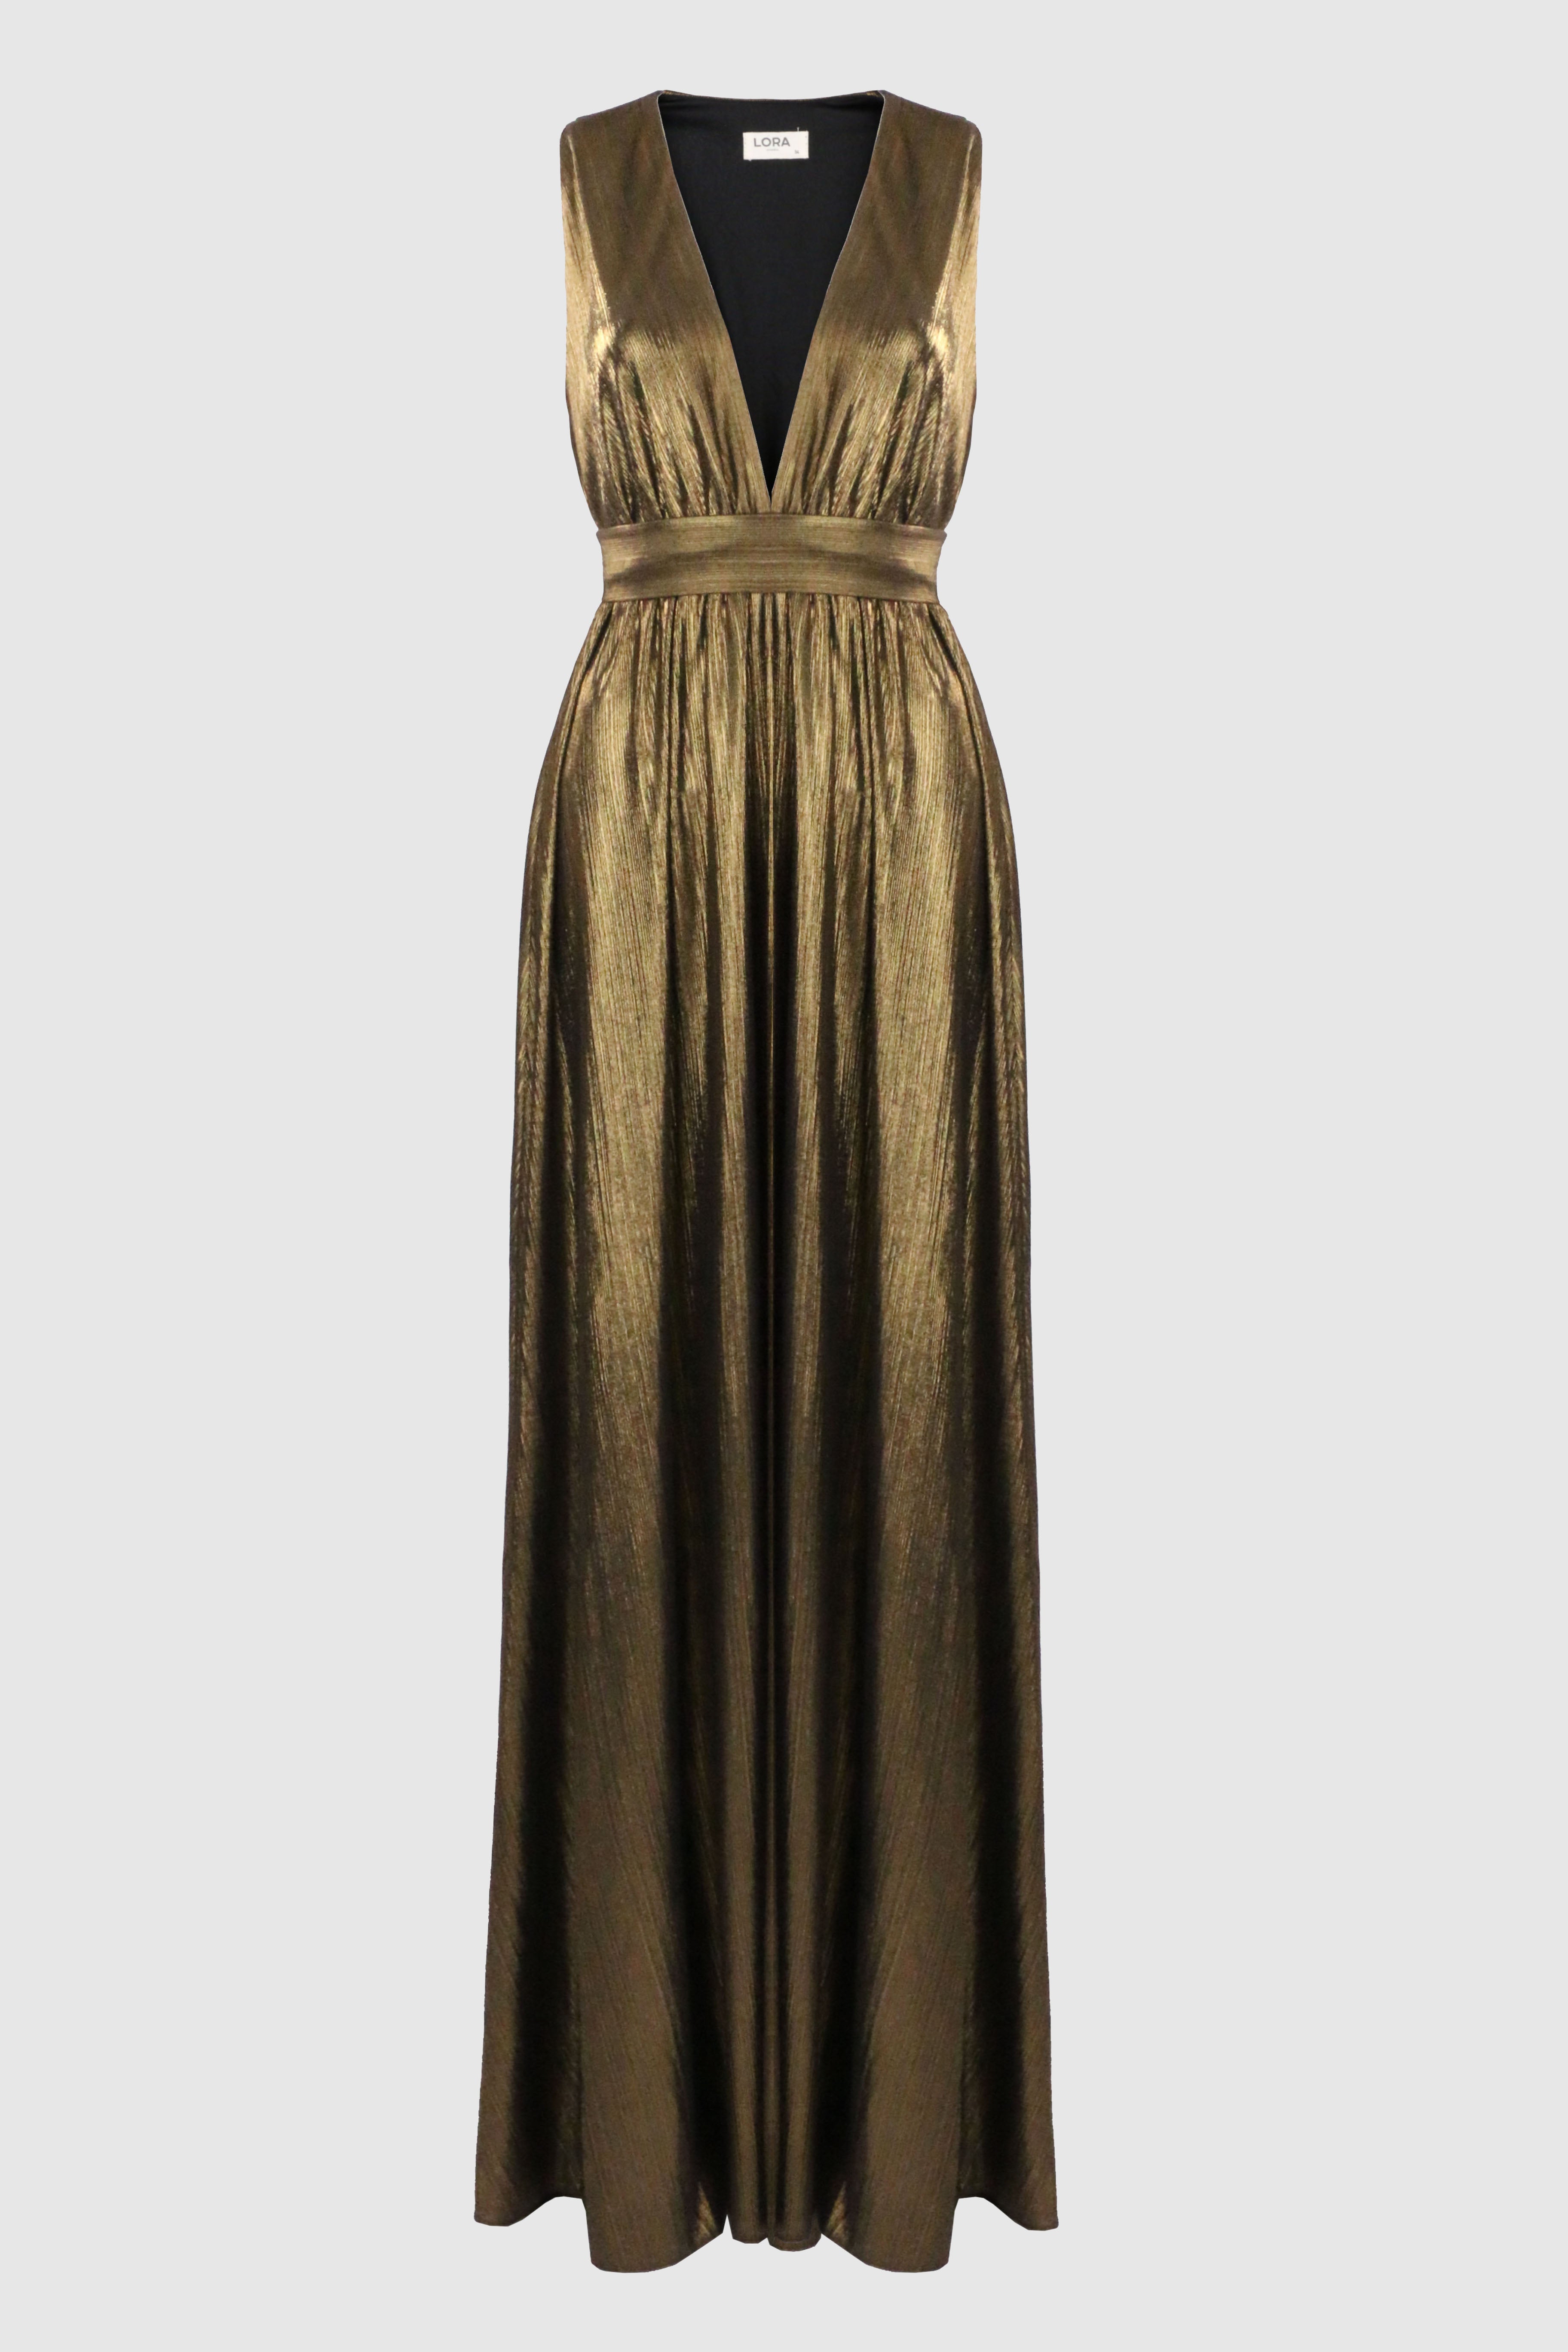 Athena Gold Gown